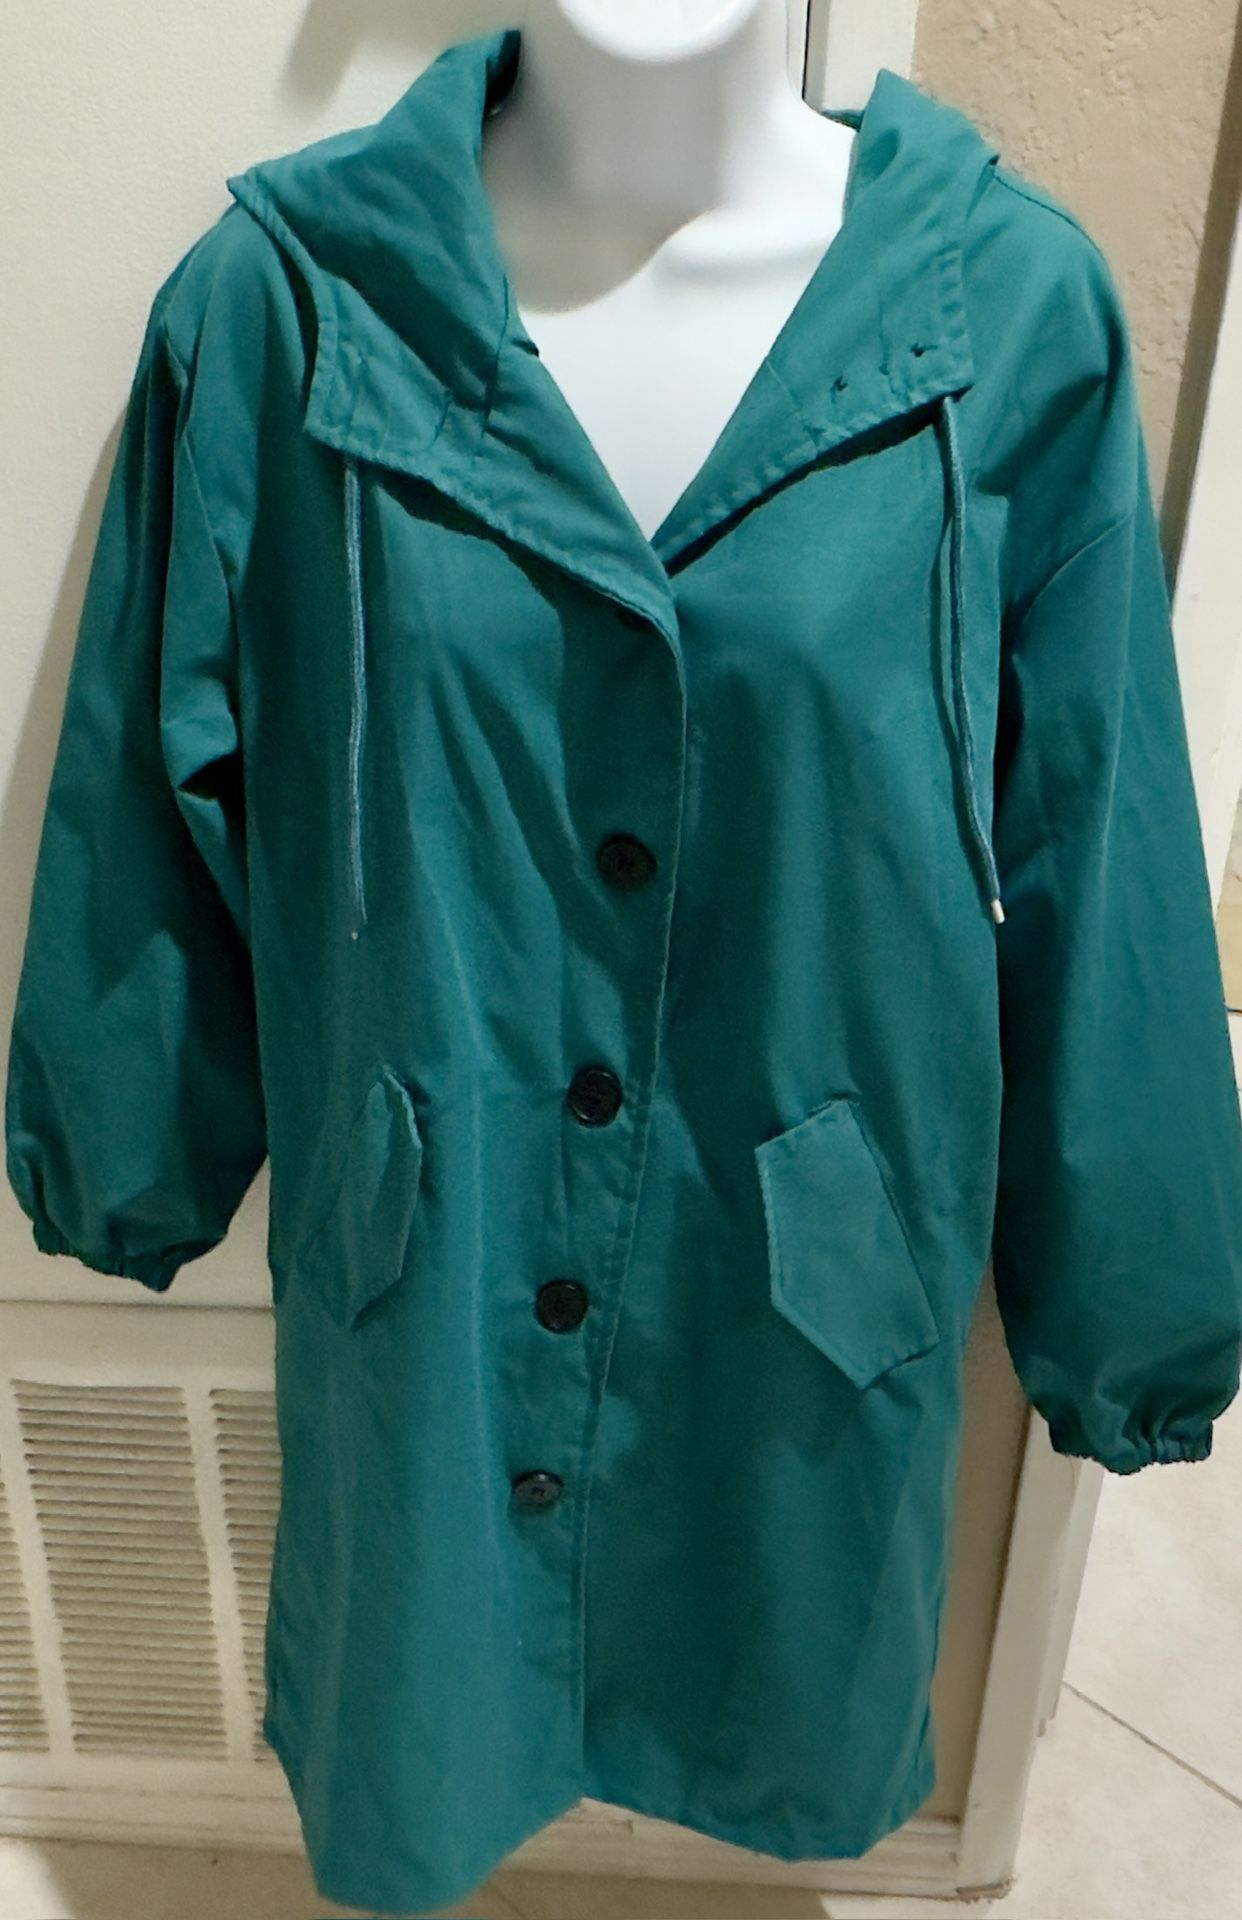 New Woman’s Teal Coat With Hood (Size Medium)